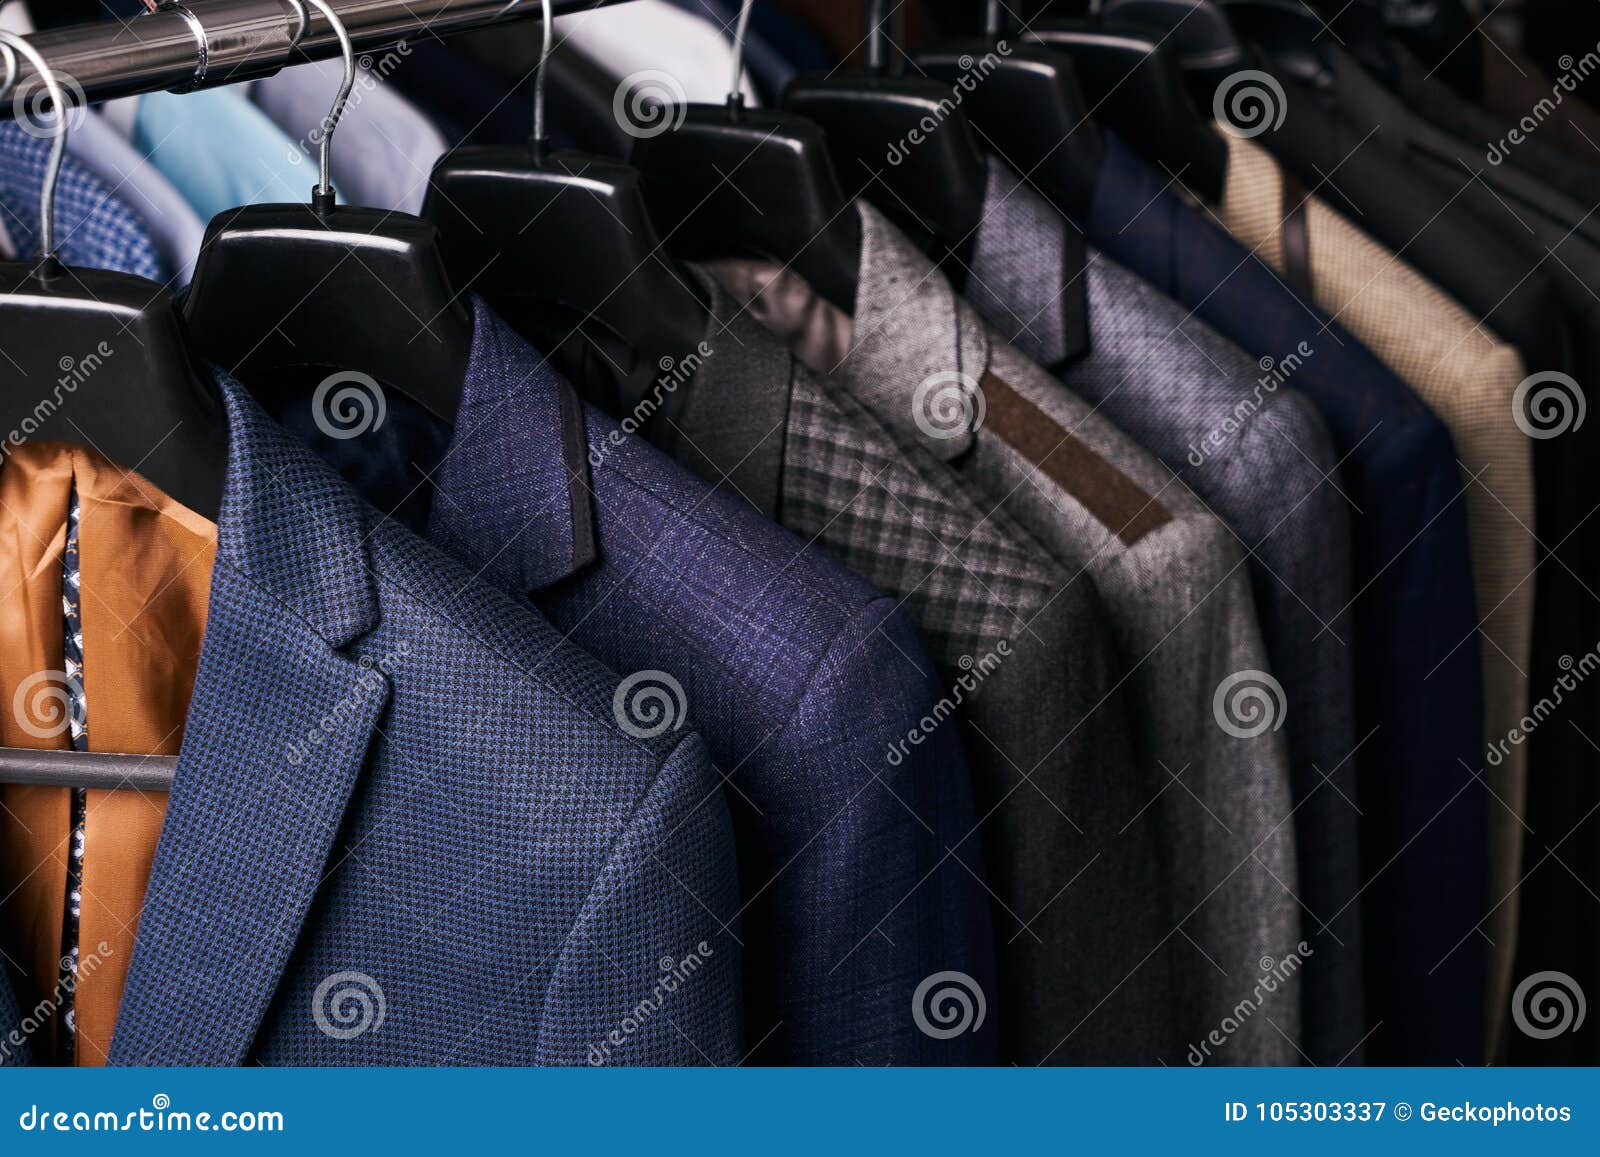 mens suits on hangers in different colors